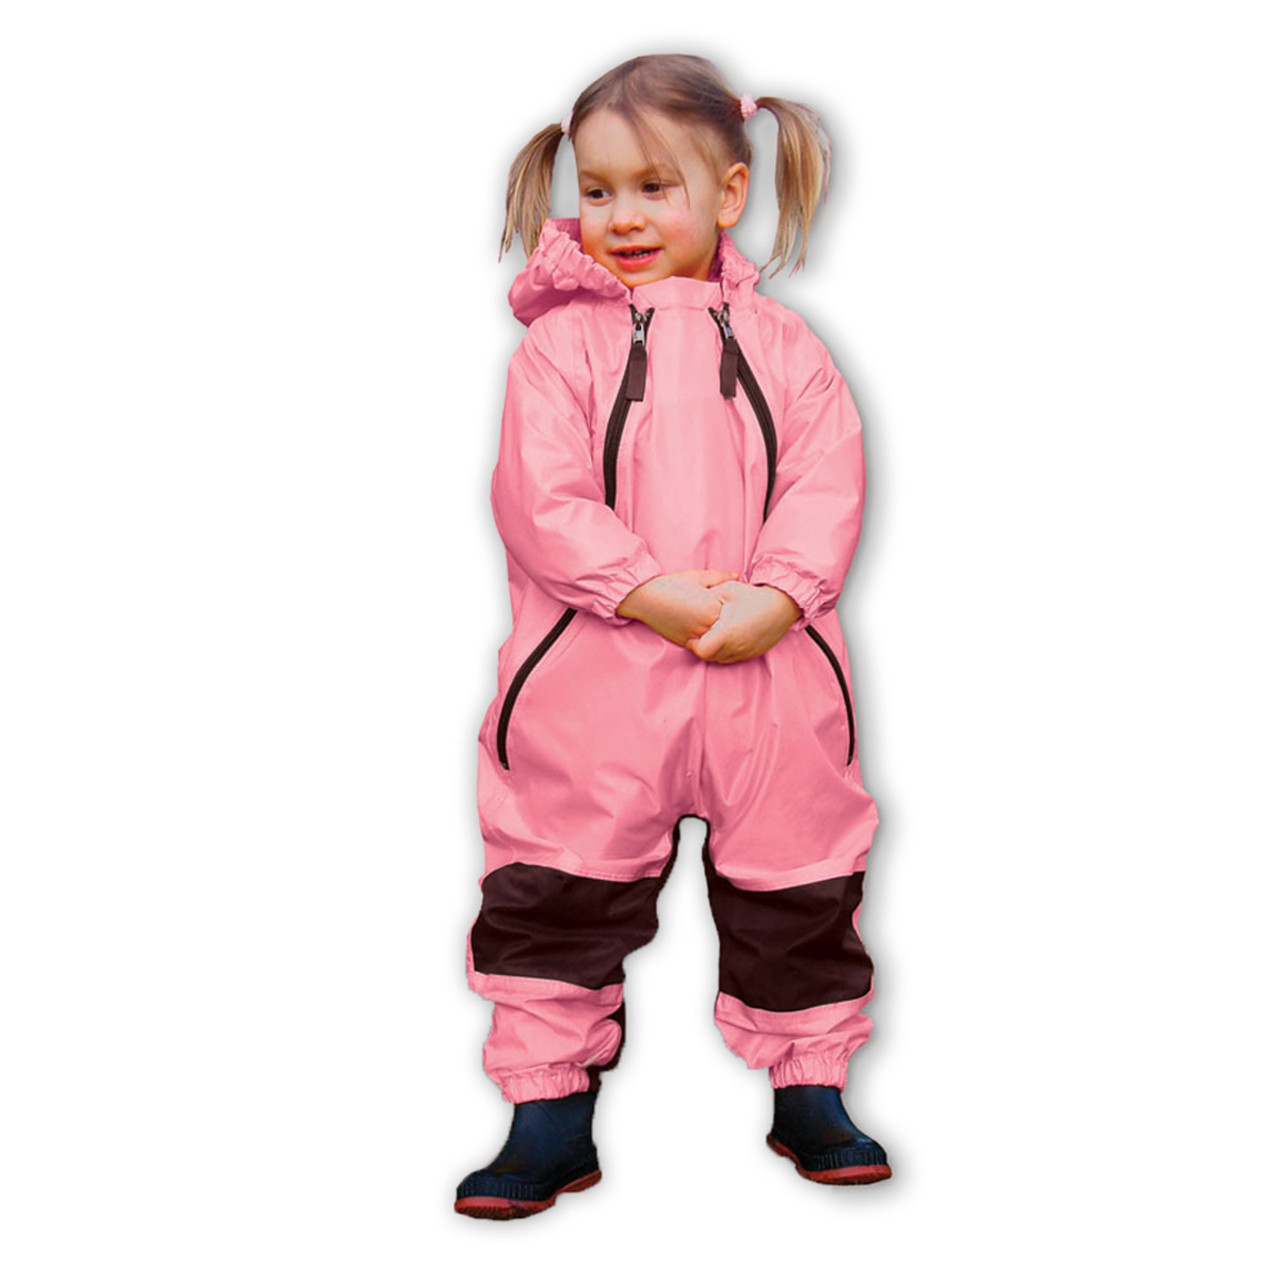 Muddy Buddy All-in-One Rain Suit-24306